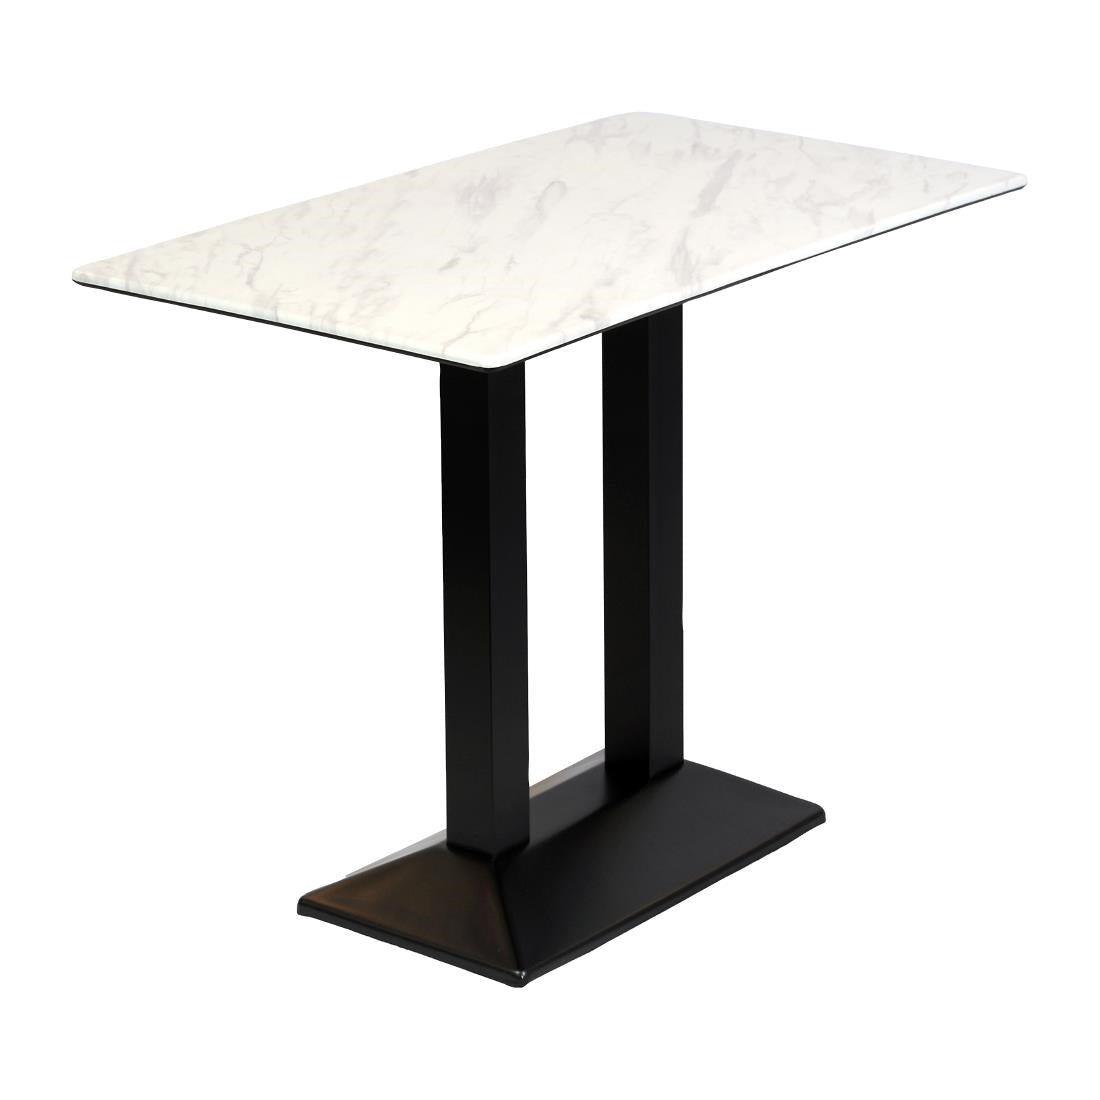 CZ838 Turin Metal Base Rectangular Poseur Table with Laminate Top Marble 1200x700mm JD Catering Equipment Solutions Ltd